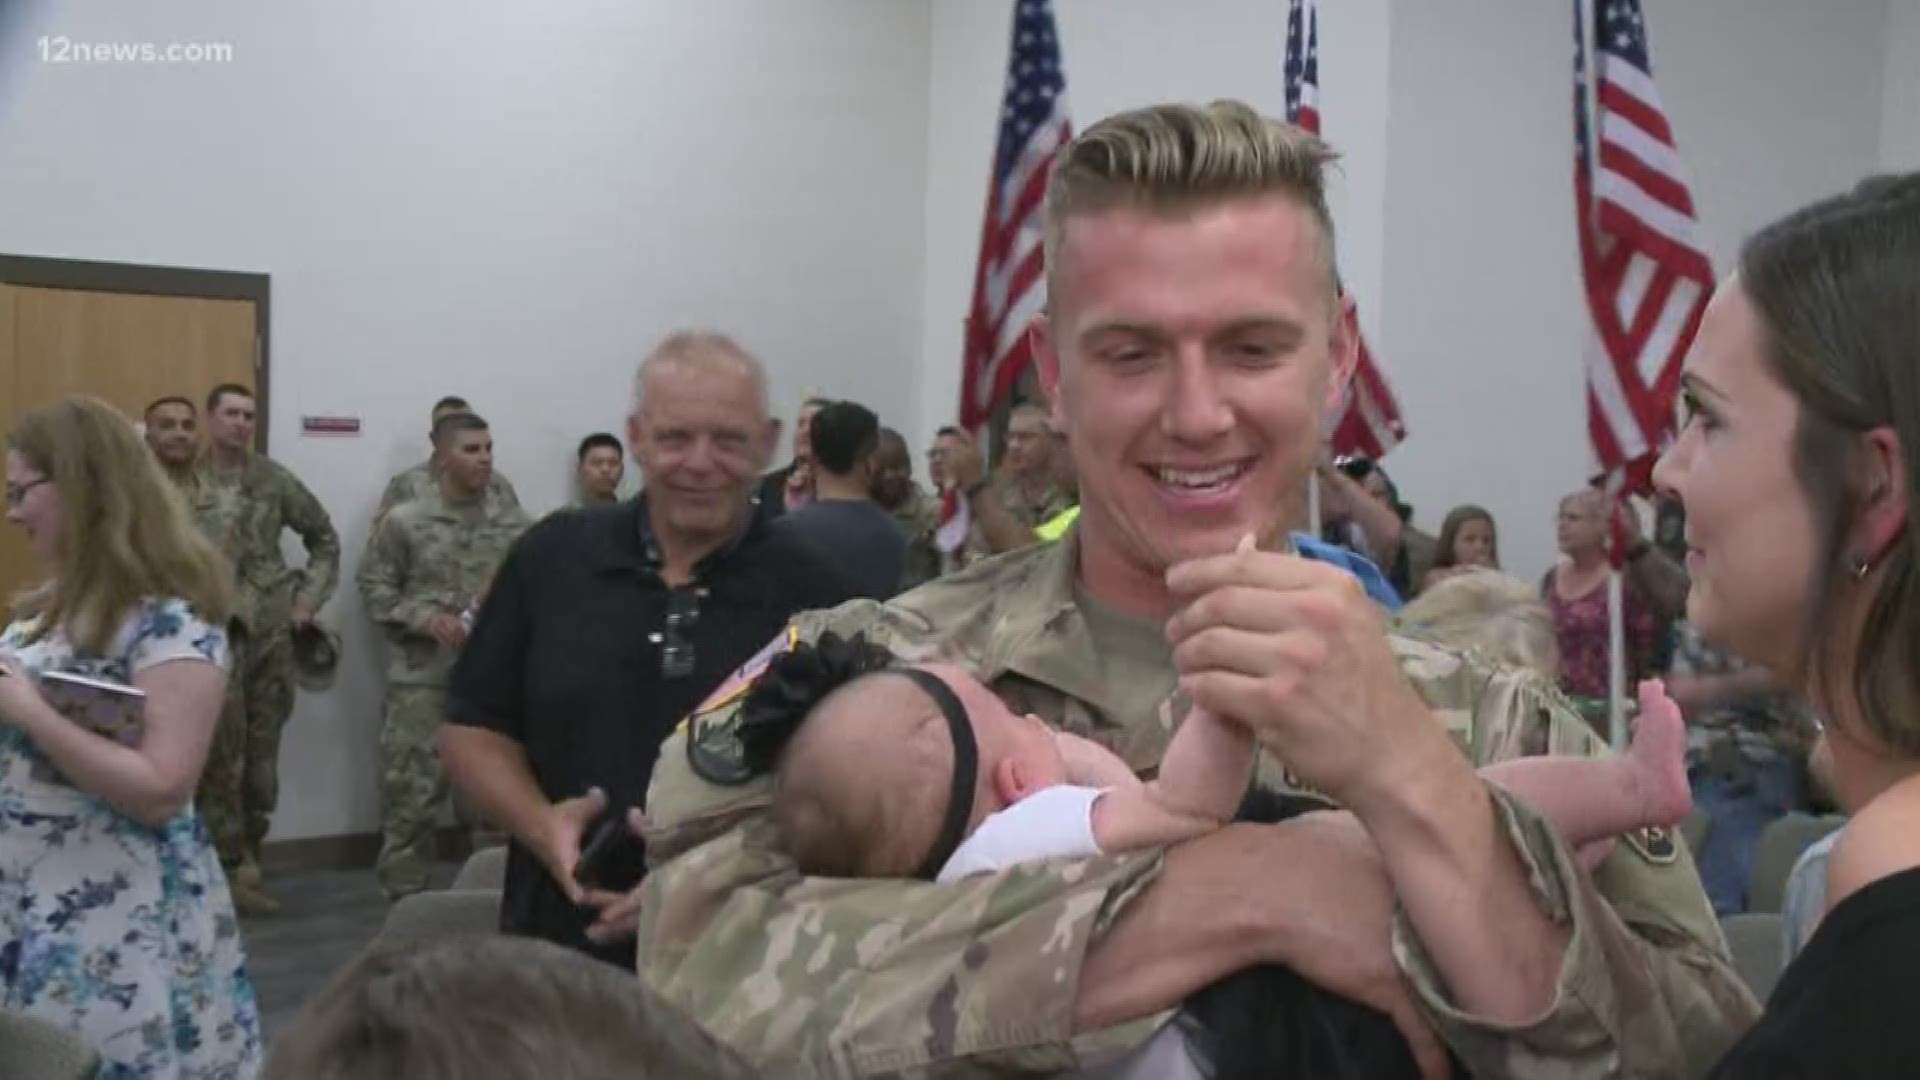 About 30 Army National Guard service members reunited with loved ones anxiously awaiting their arrival.